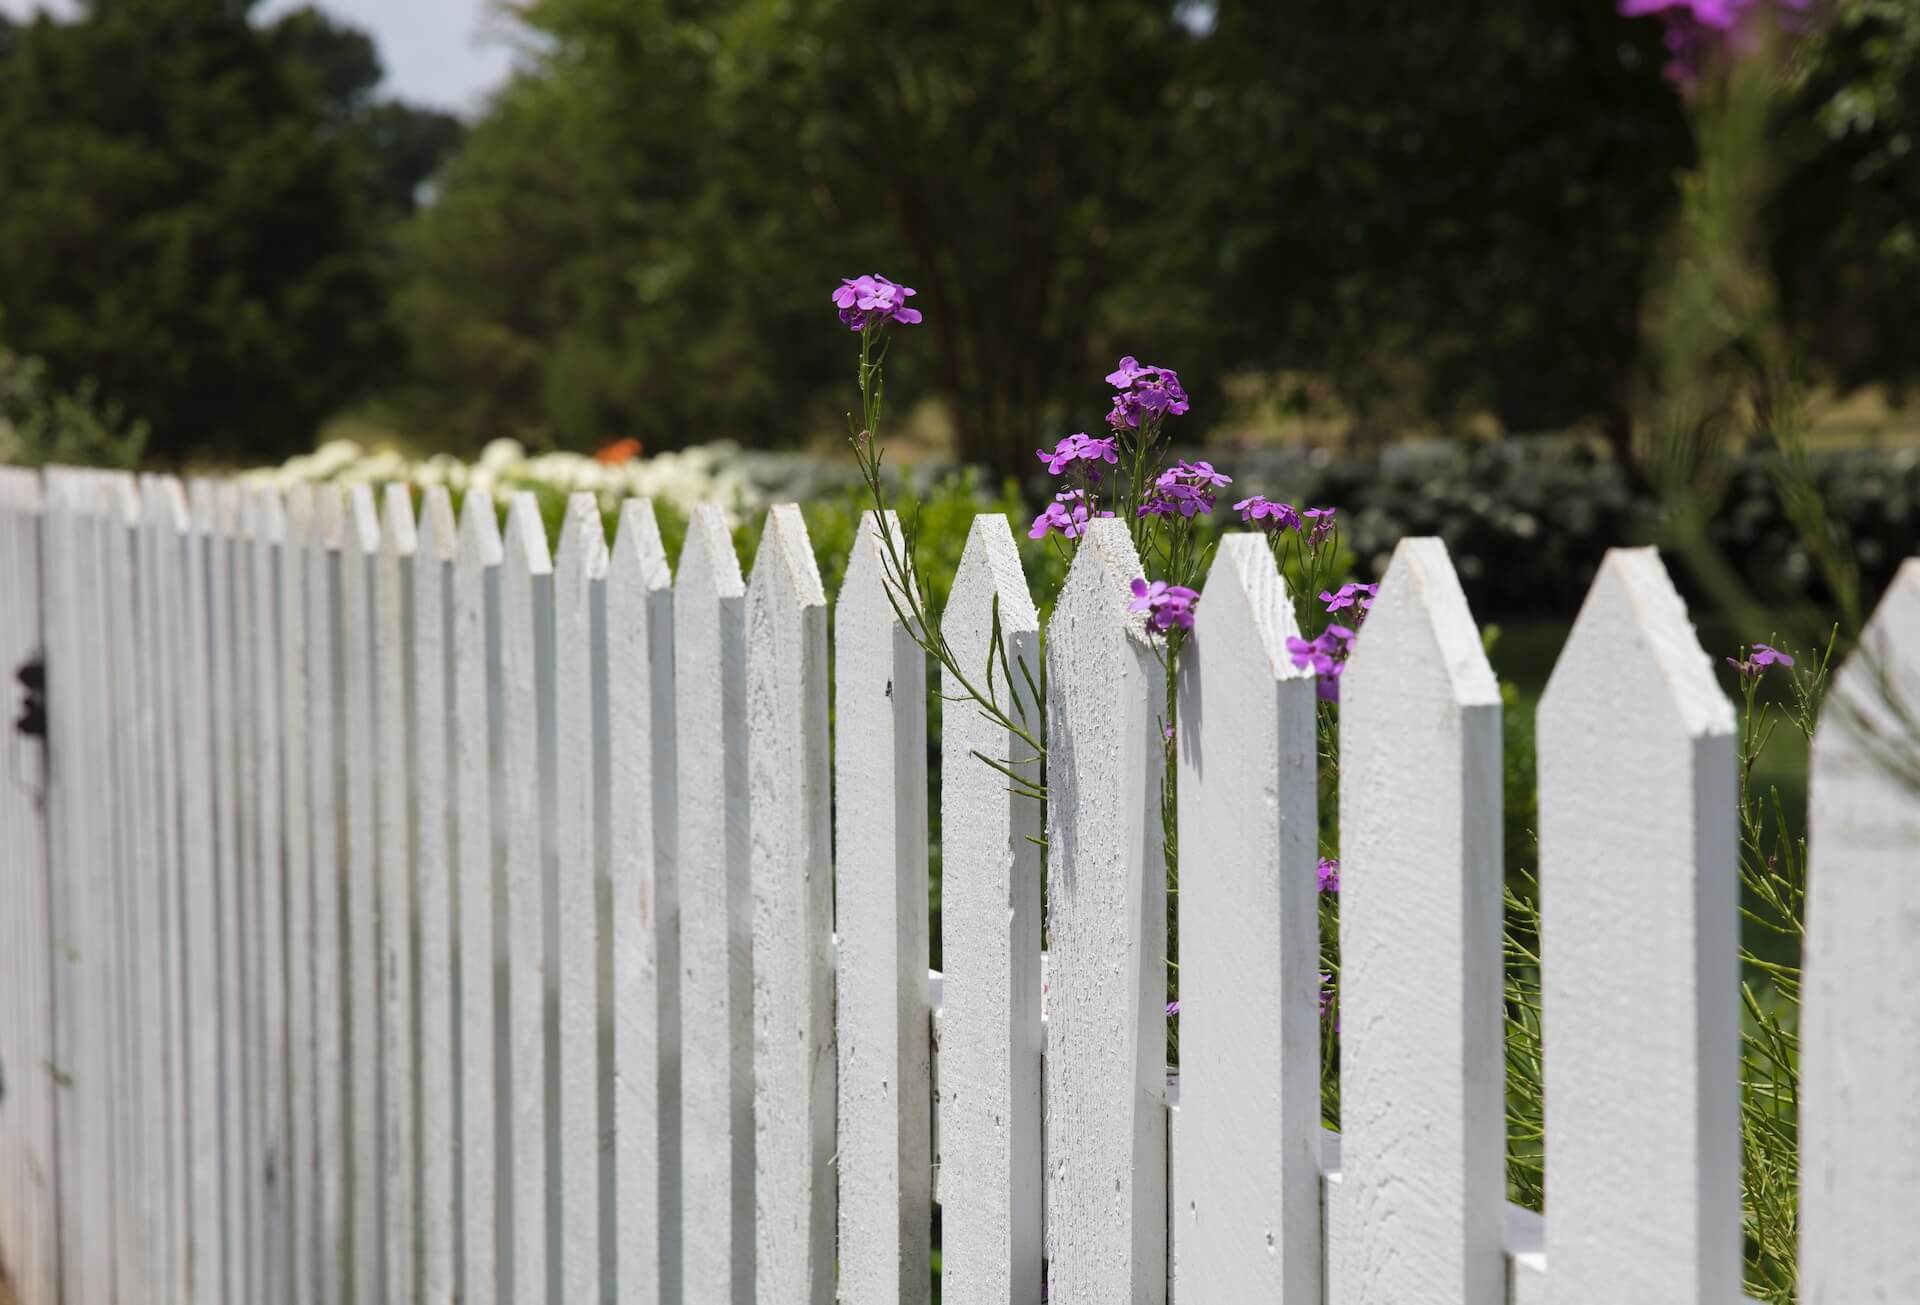 My Neighbour’s Fence is Too Low: A Boundary Dilemma